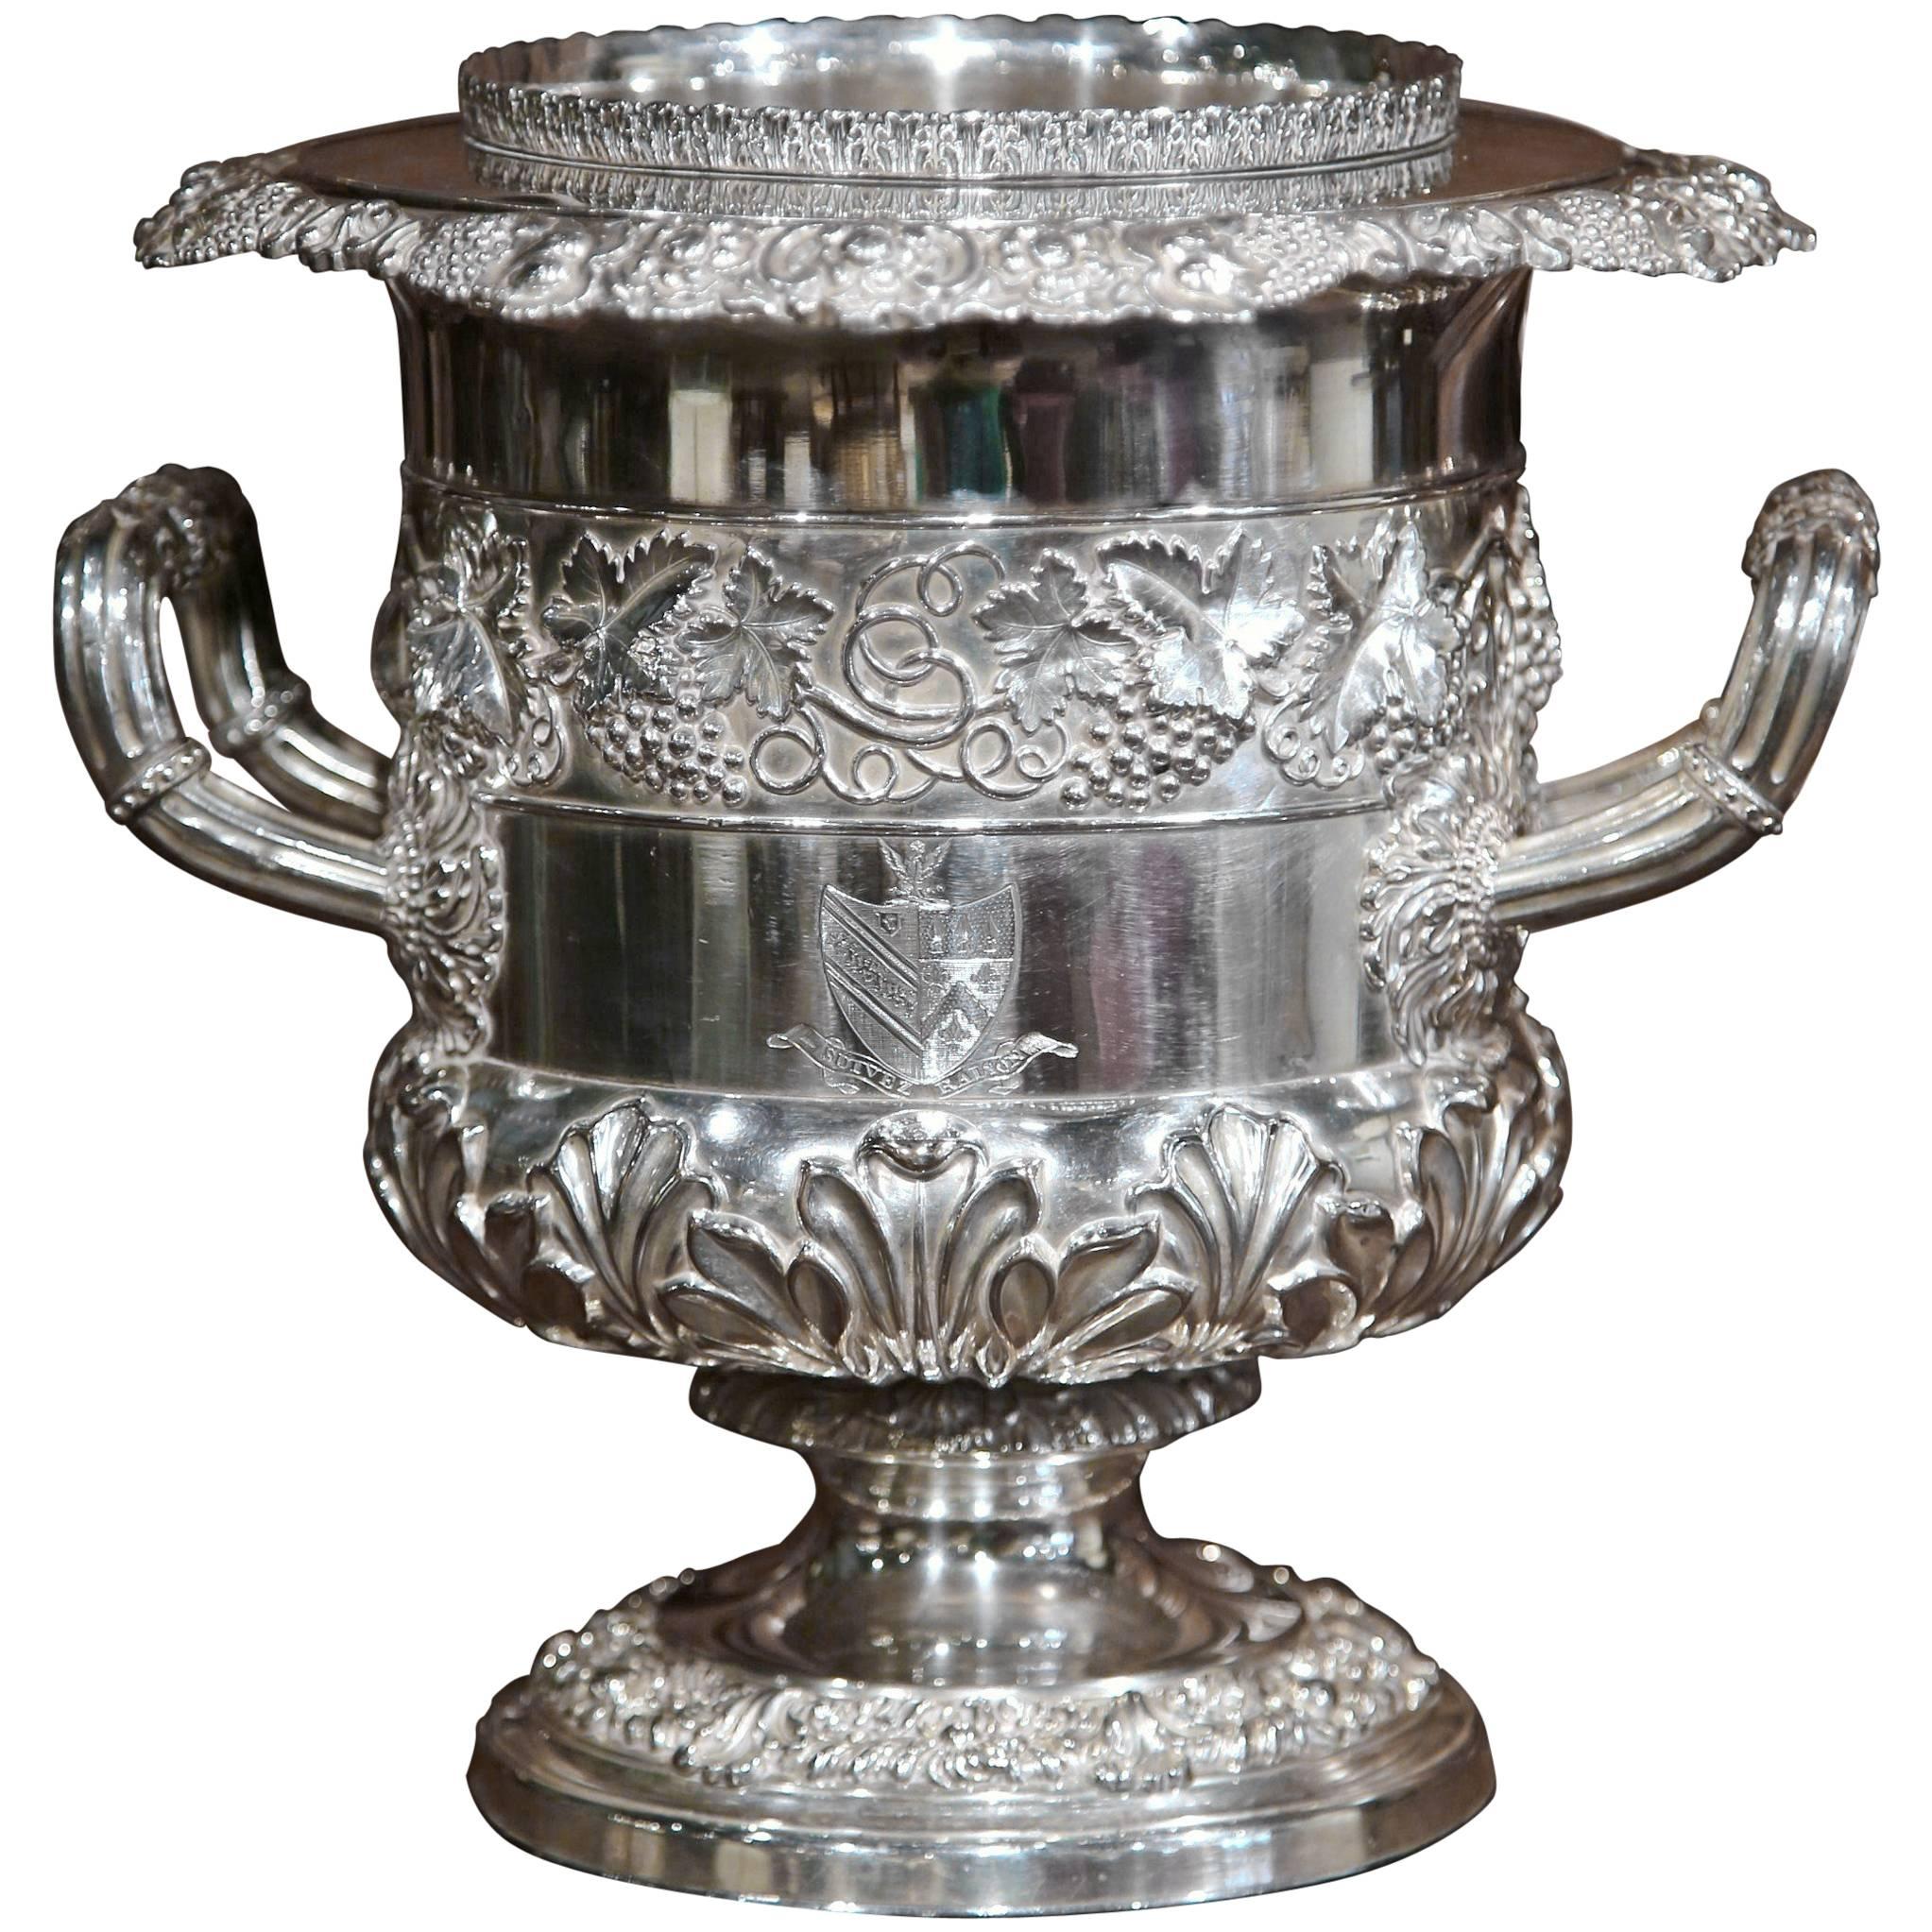 Early 20th Century English Silver Plated Wine Cooler with Engraved Coat of Arms